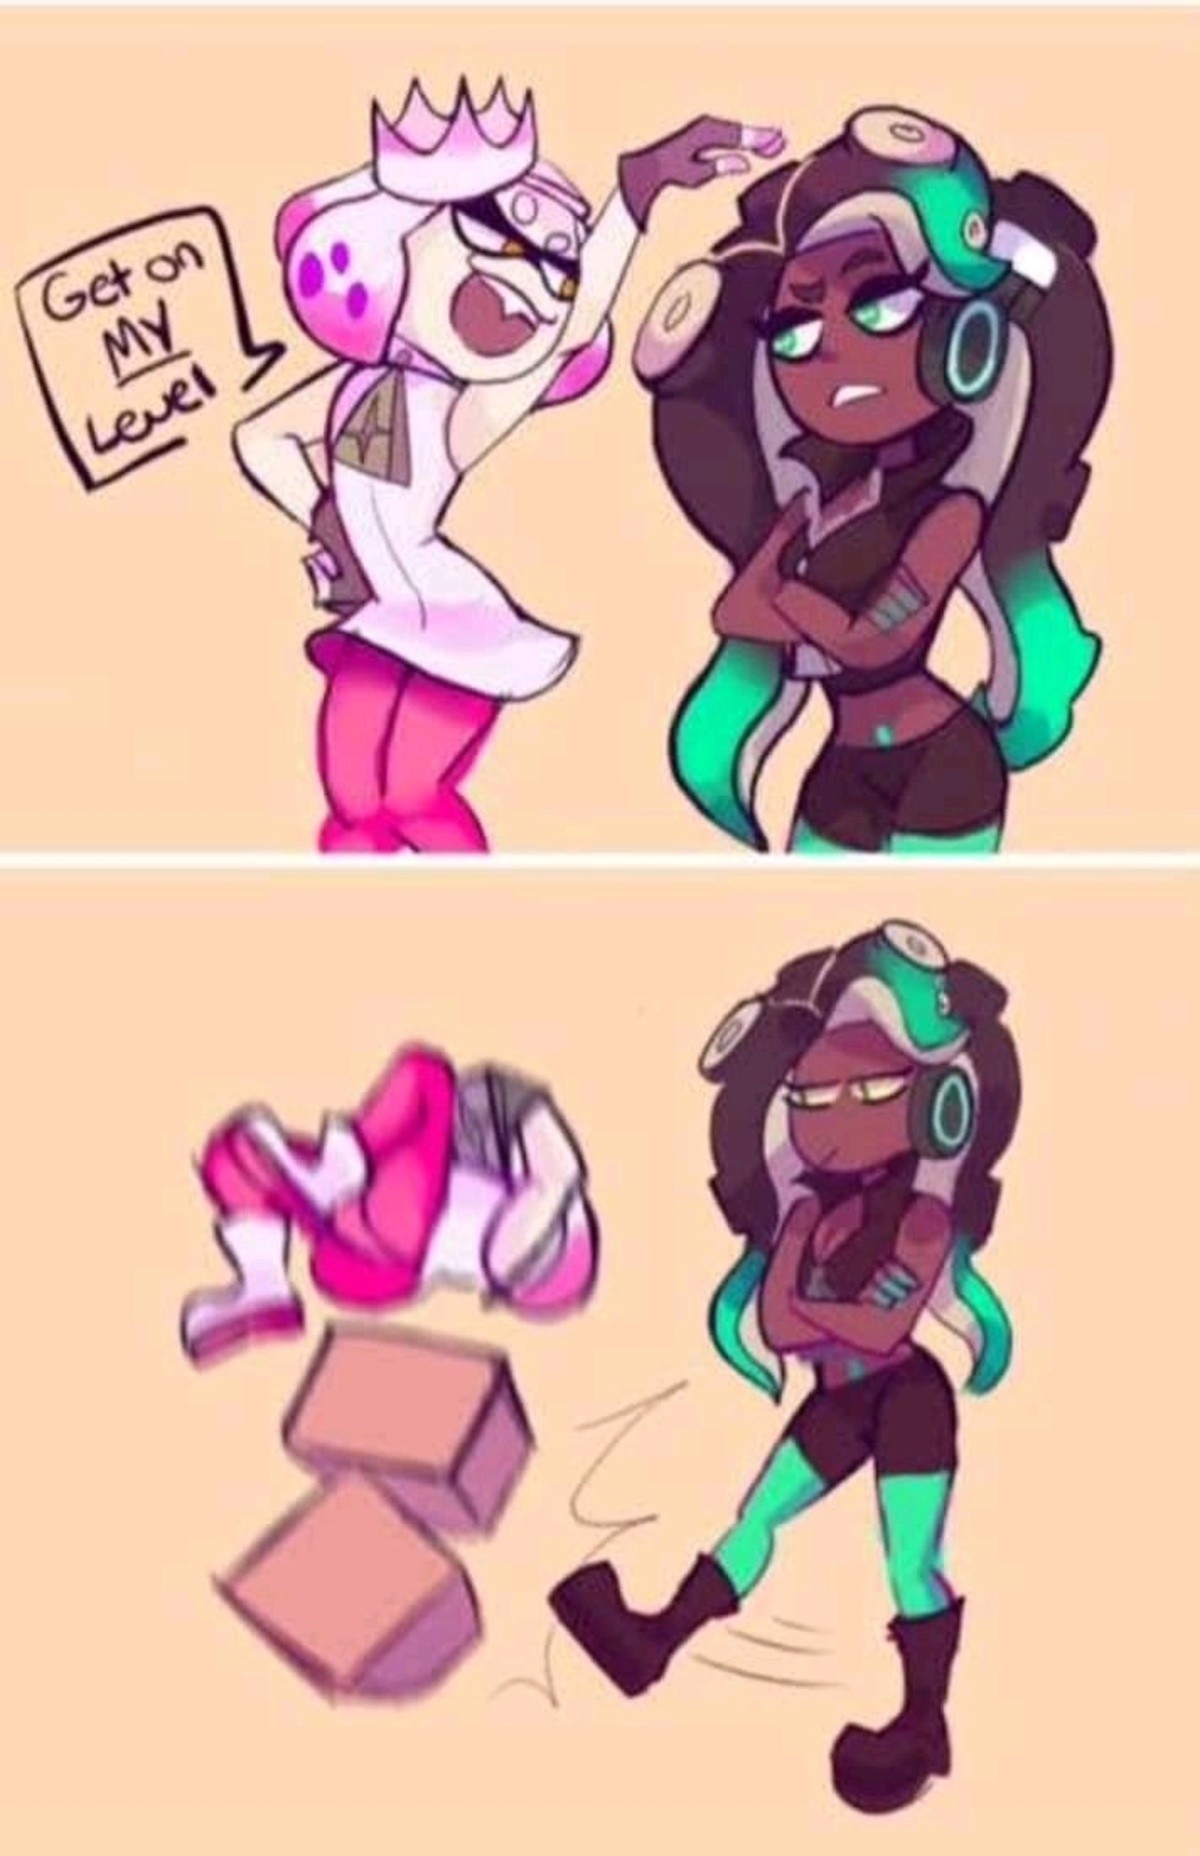 milky AmongUs. .. Ive seen so much Splatoon porn i expected a third panel where Marina breeds Pearl with a futa